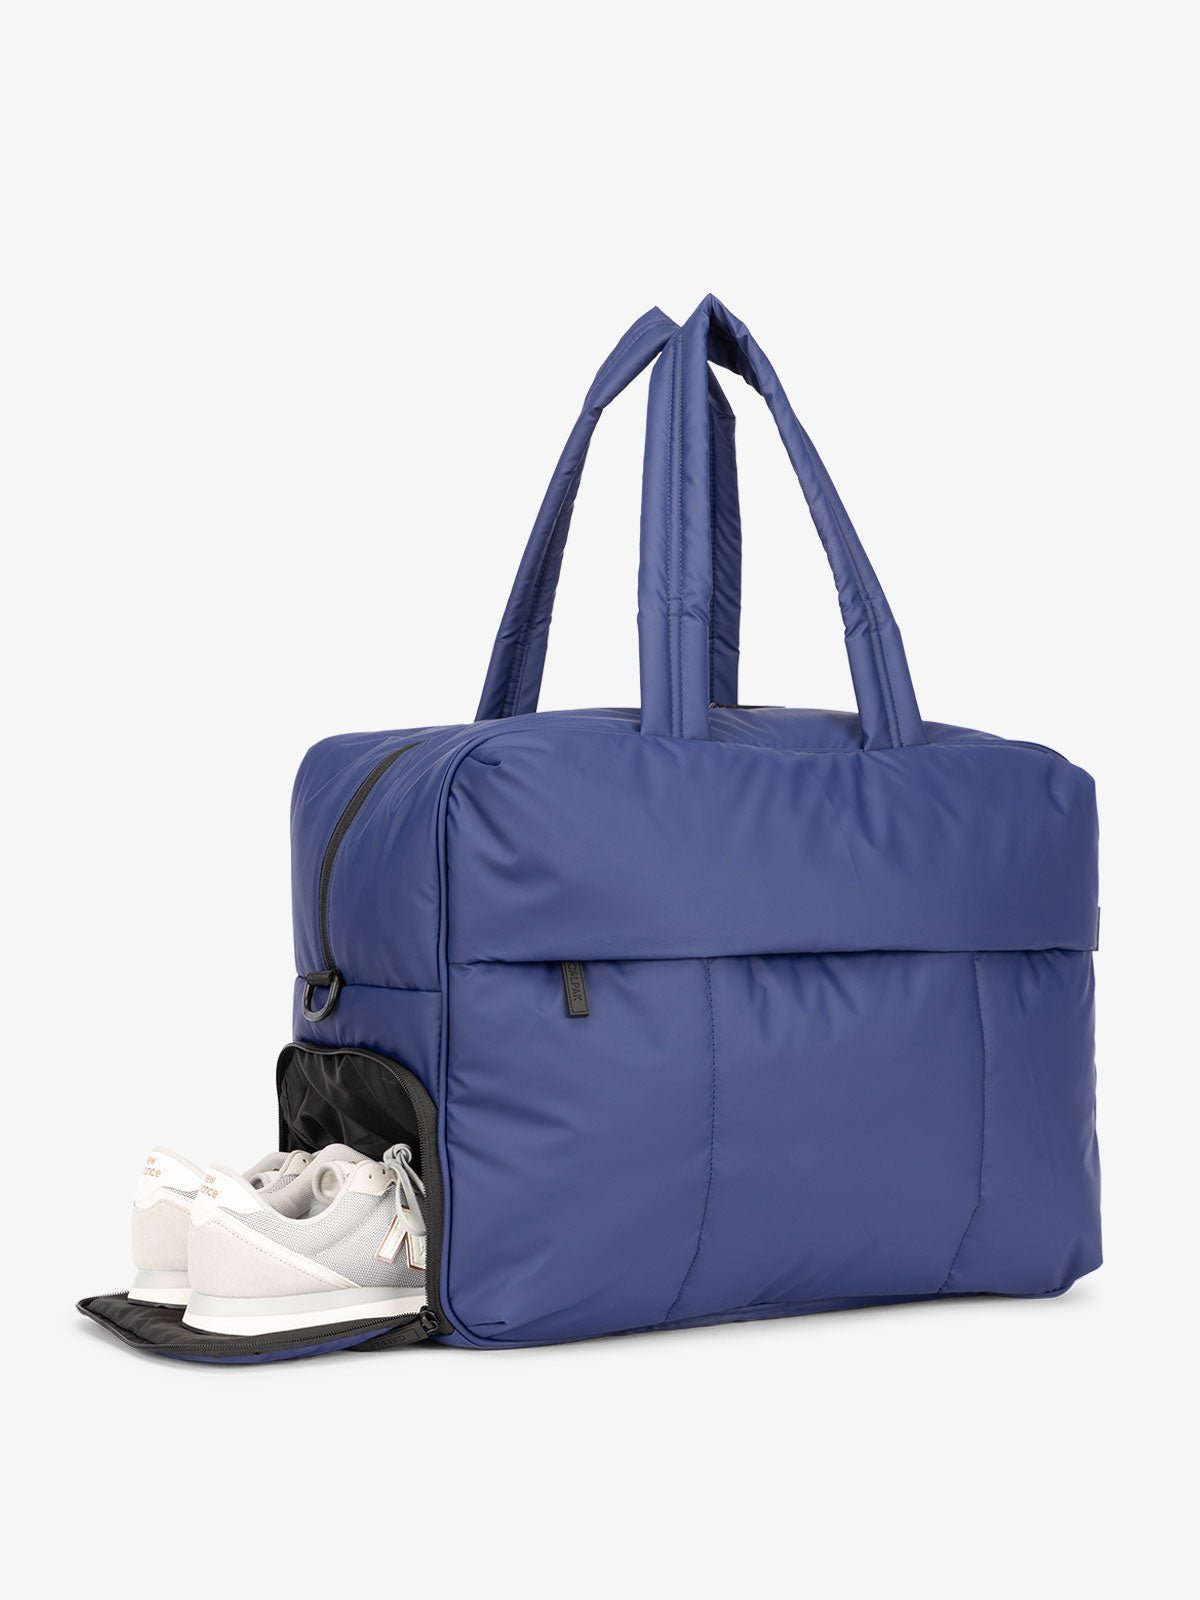 CALPAK Luka large duffel bag with side shoe compartment and dual handles in dark navy blue